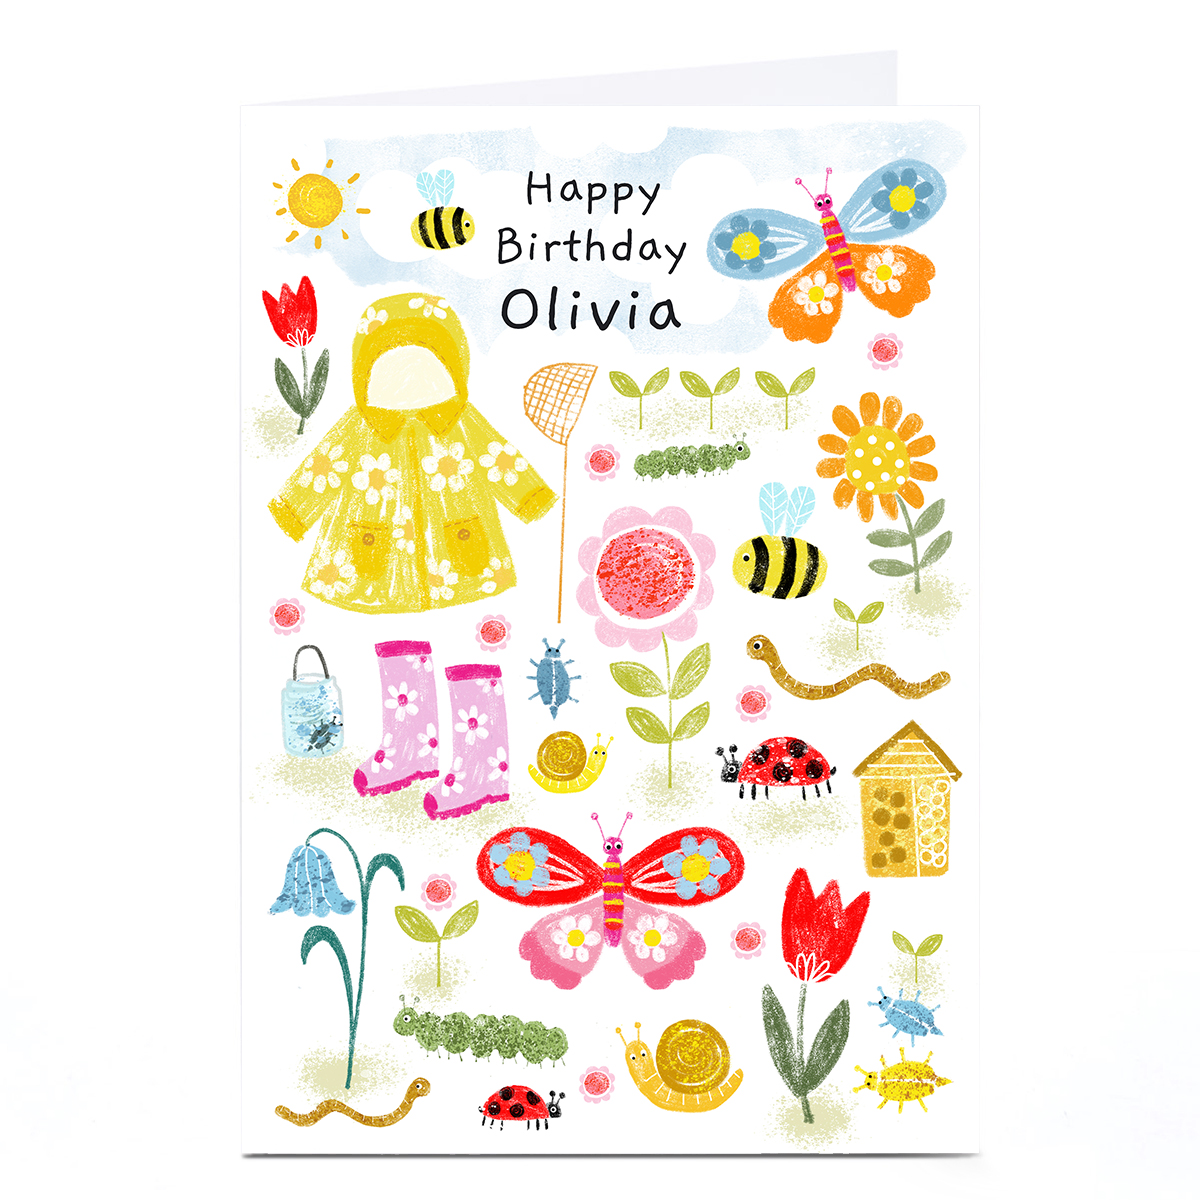 Personalised Lindsay Loves To Draw Birthday Card - Garden Bugs